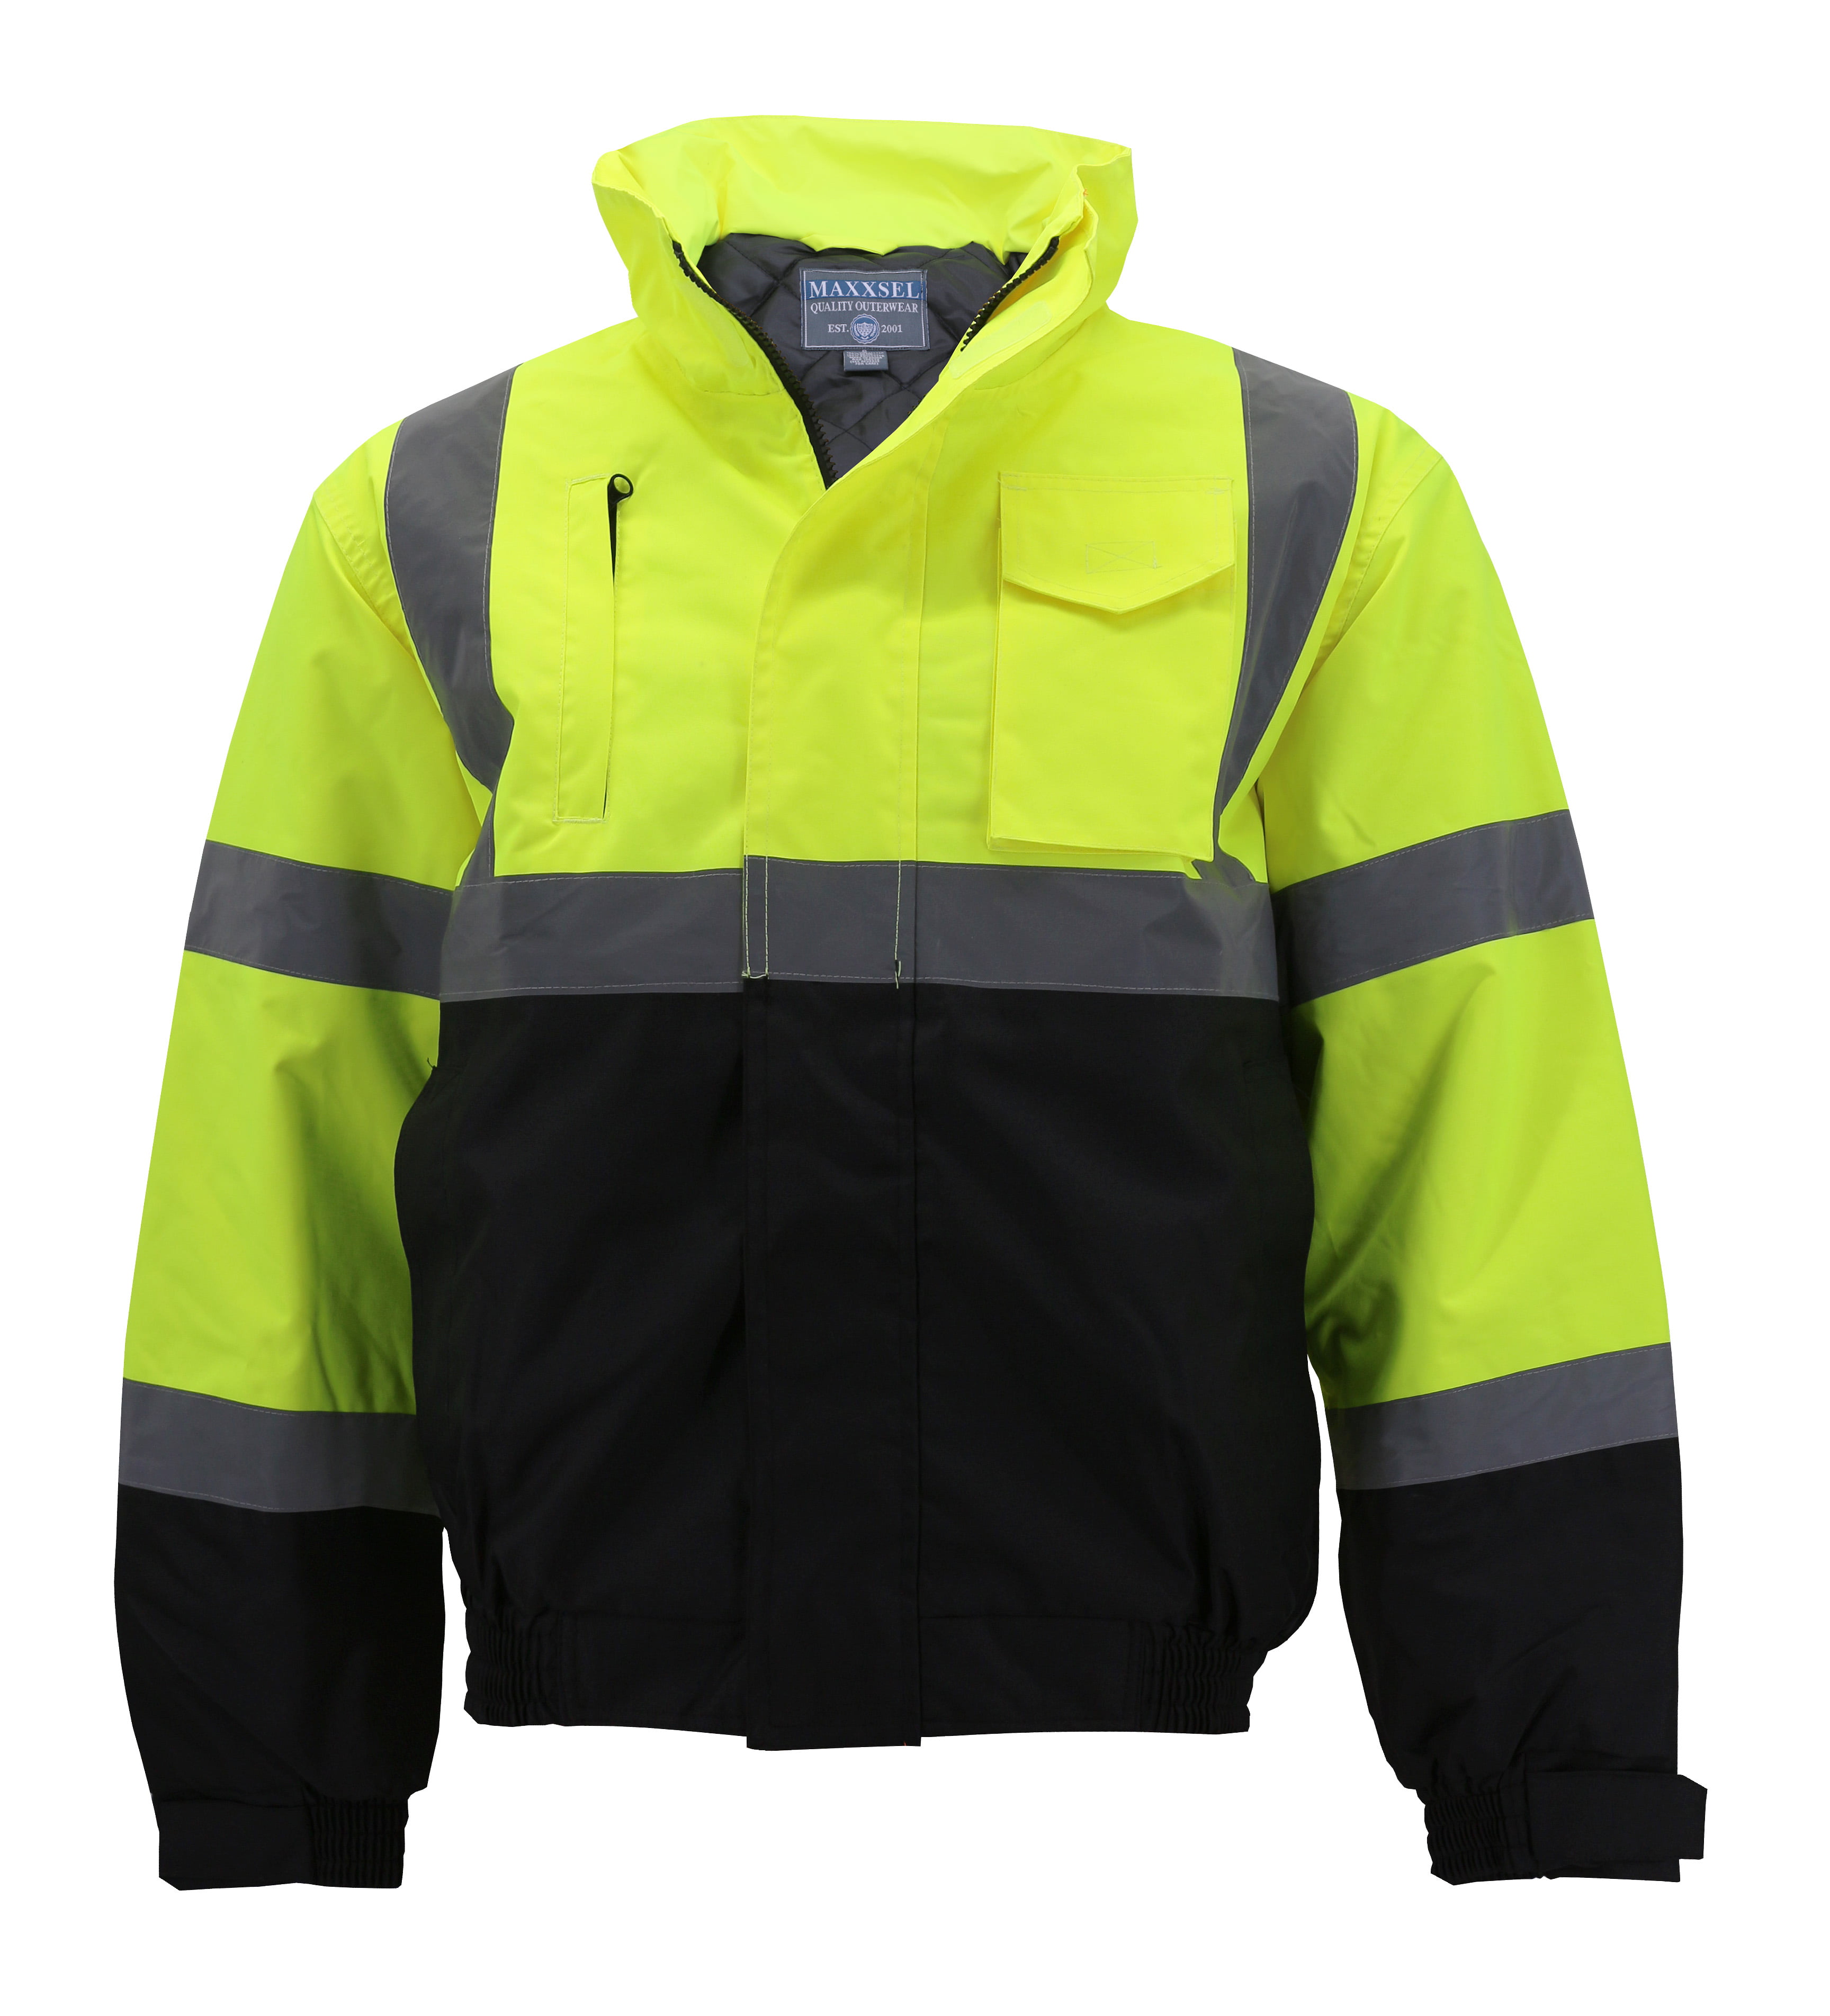 Safety Yellow Cycling Vest - Urban Cycling Apparel